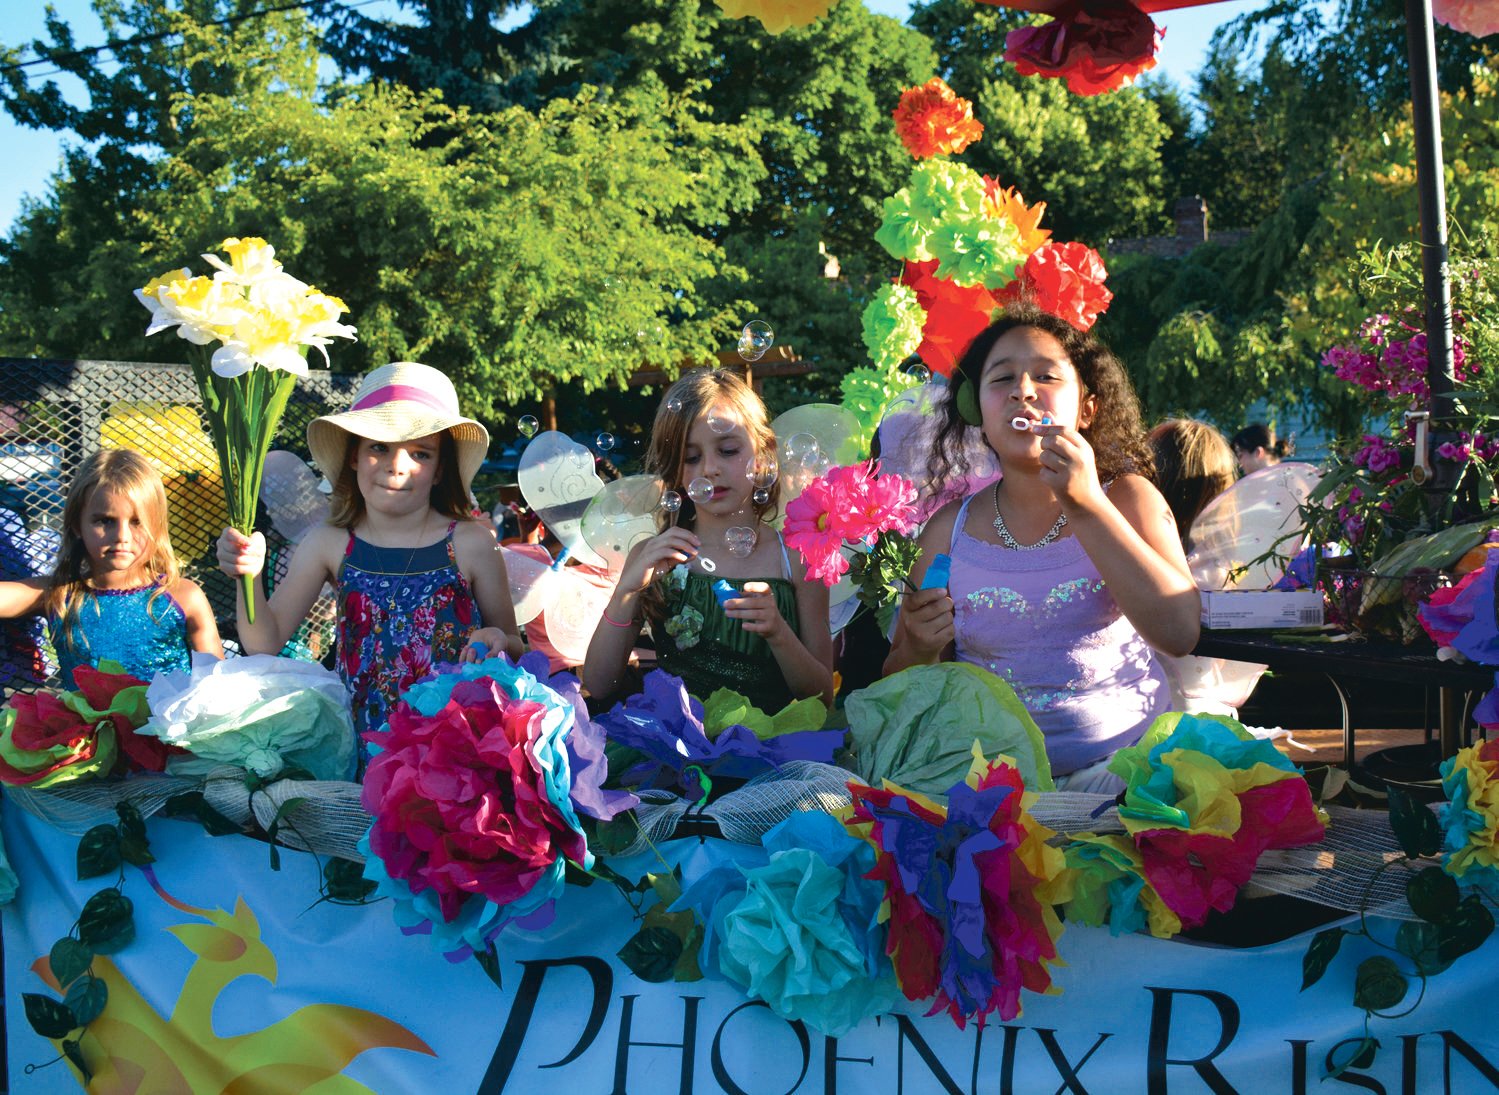 The Yelm Prairie Days Parade will take place at 9 a.m. on Saturday, June 25.